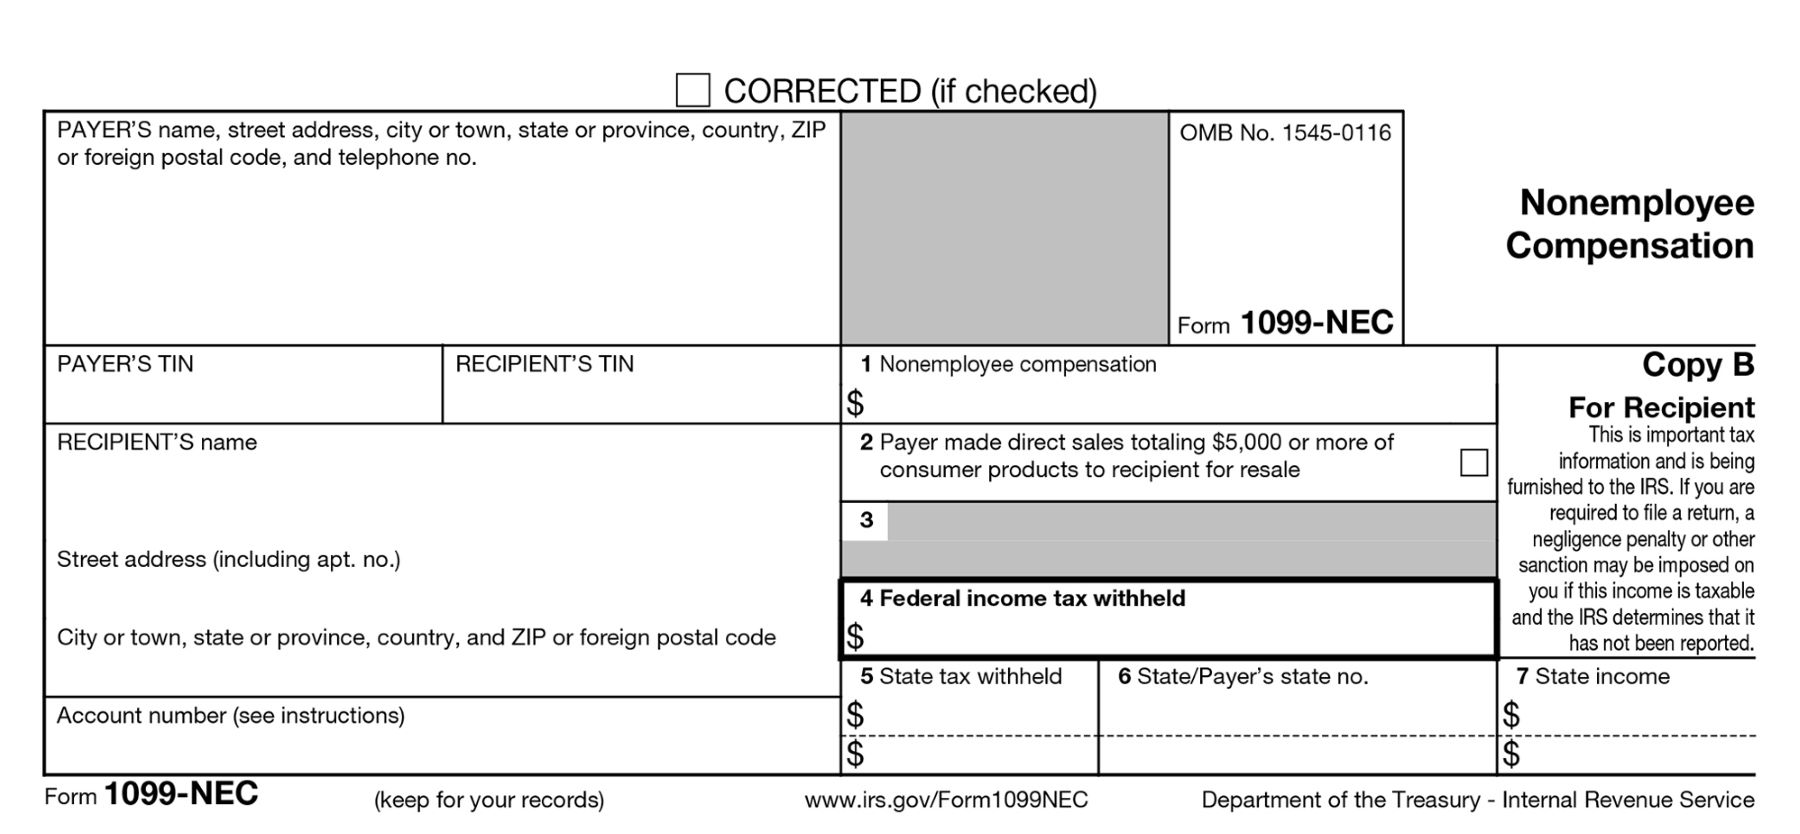 How To File Corrected 1099-NEC With The IRS